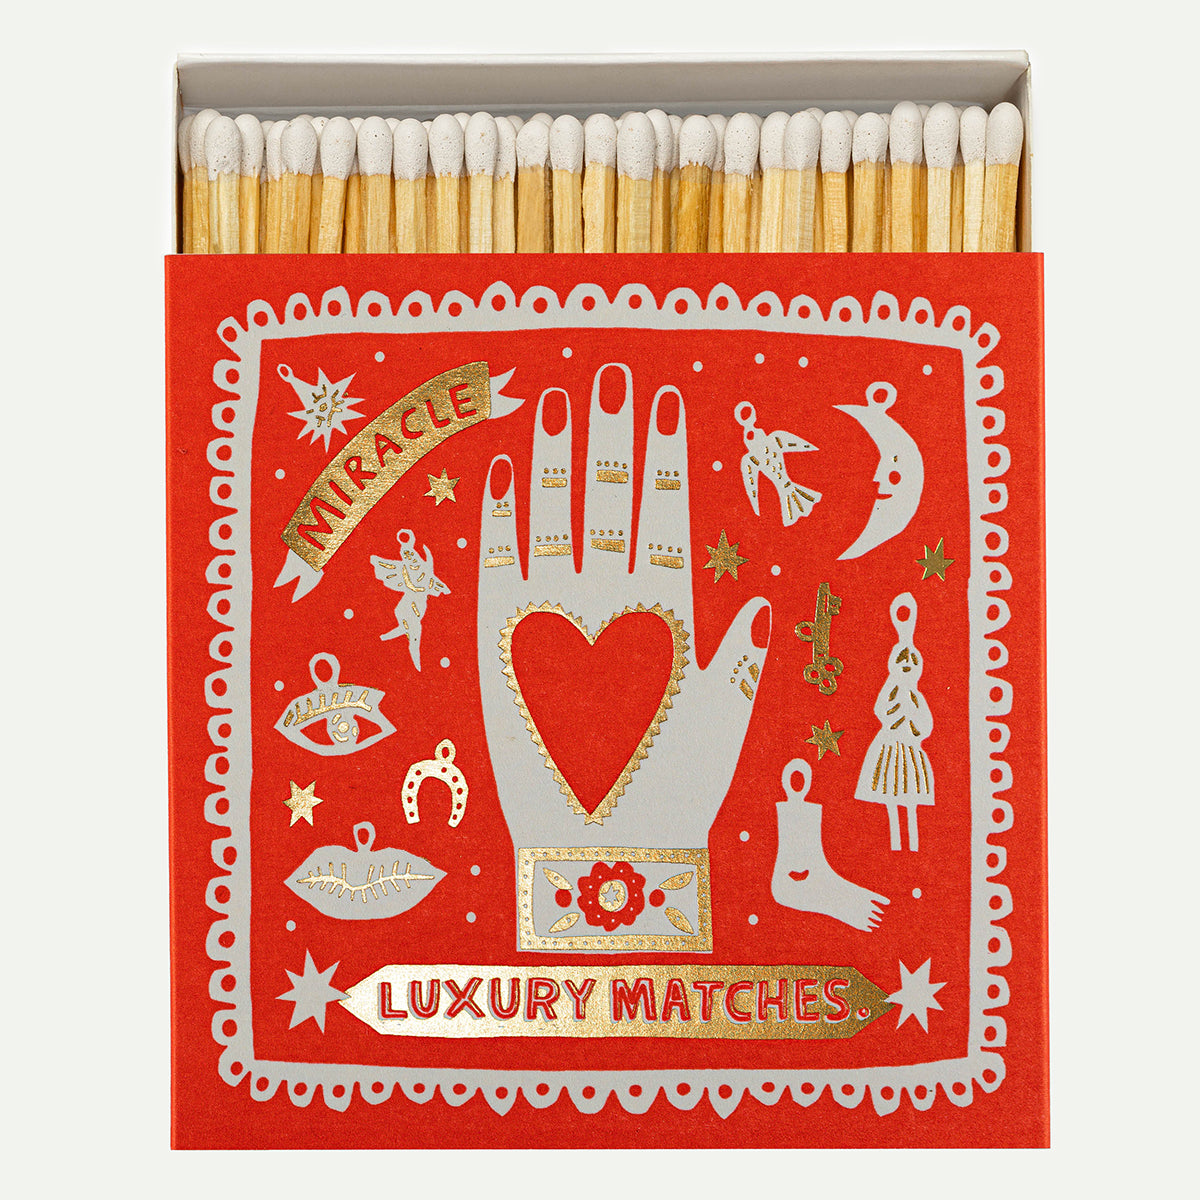 Archivist Miracle Luxury Matches